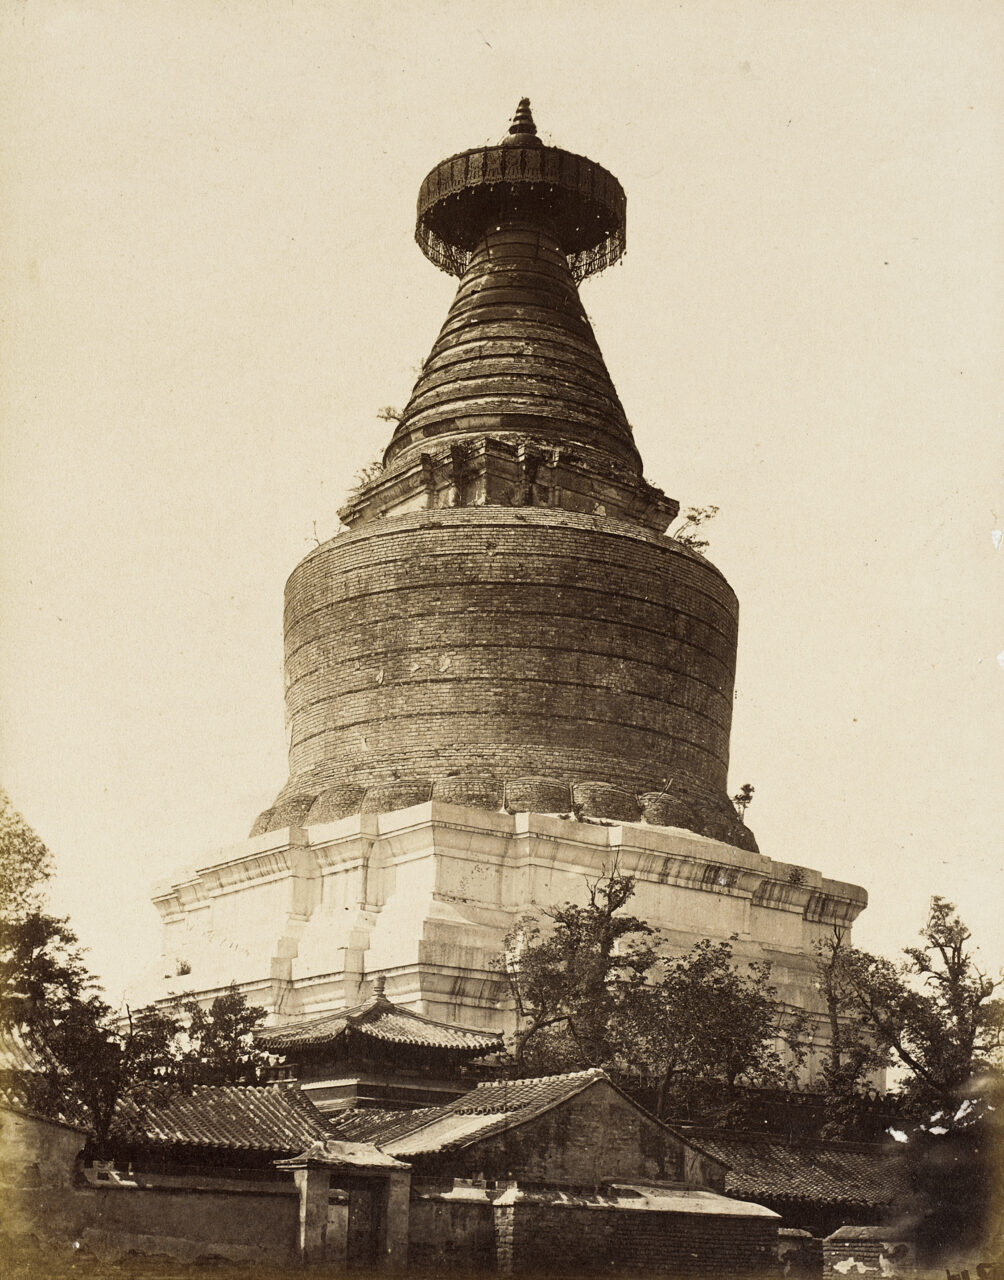 Wide view sepia photograph of monumental stupa topped with canopy towering over roof and treeline